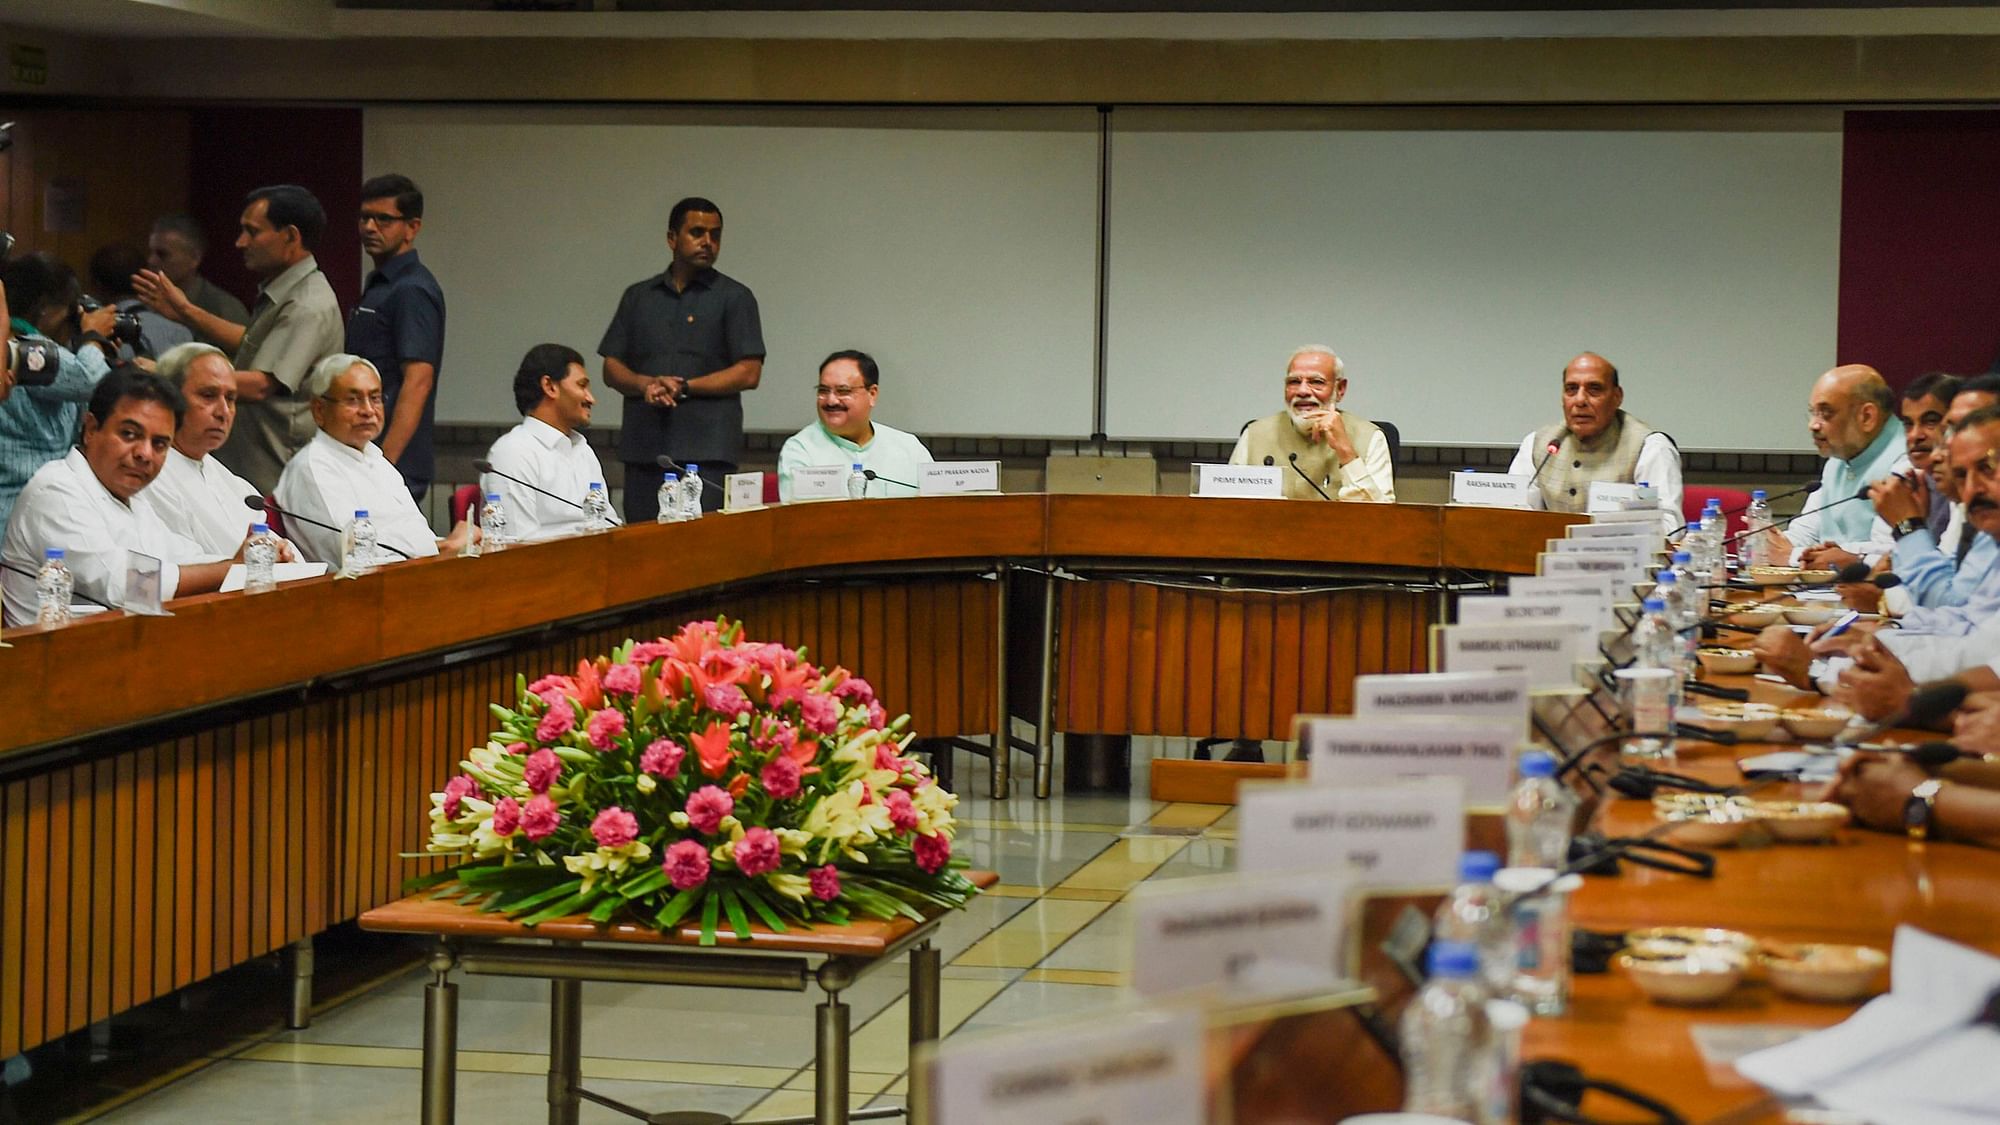 Leaders of various political parties at the meeting chaired by PM Narendra Modi.